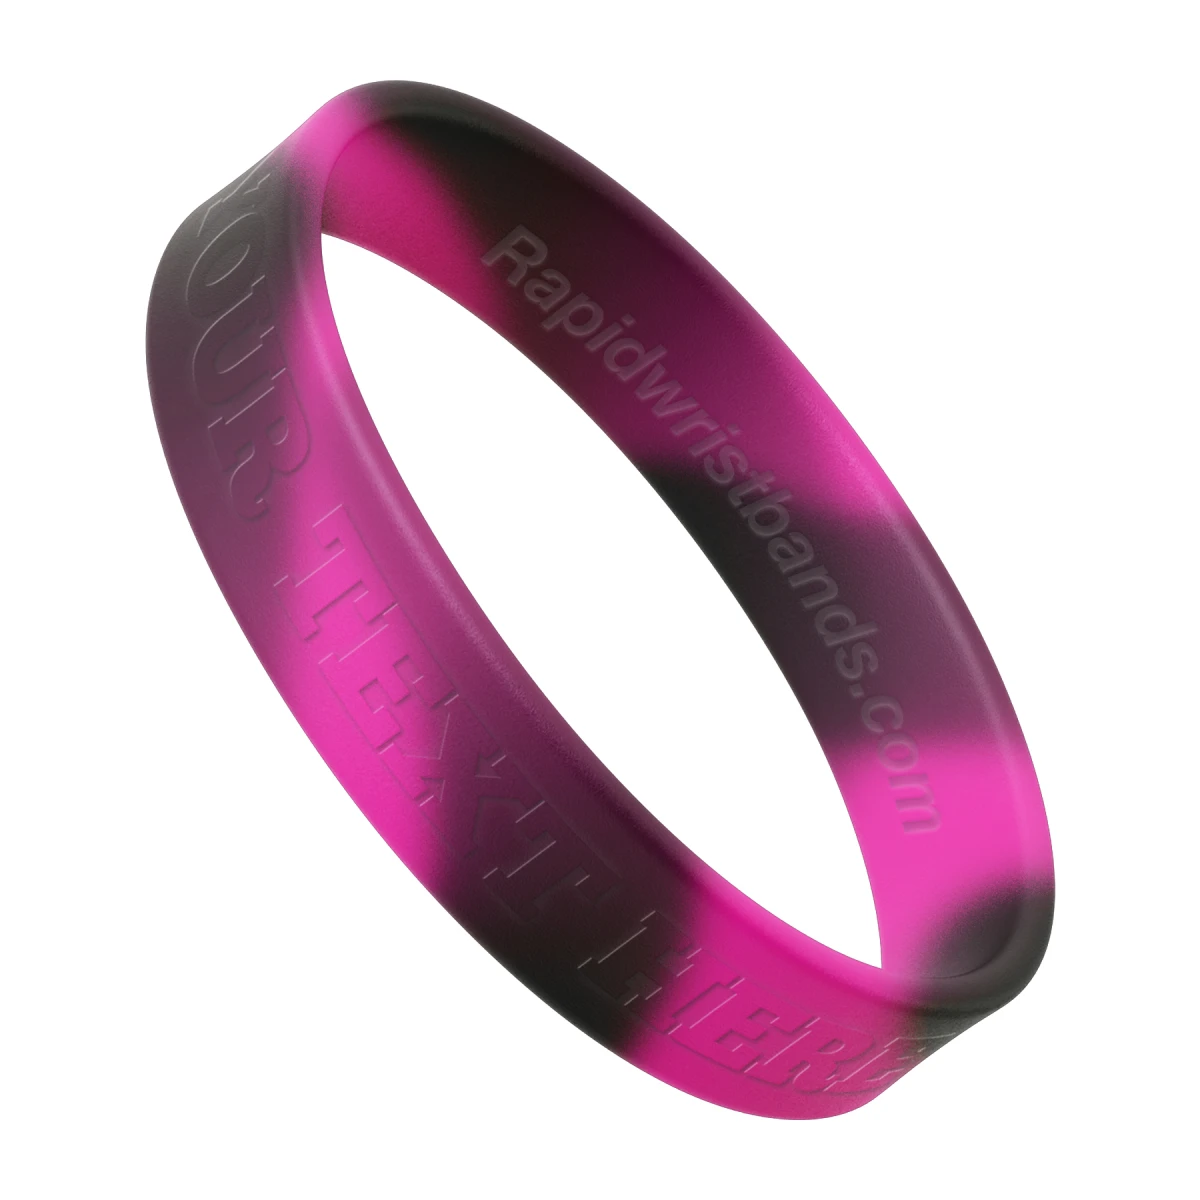 Swirl Black/Hot Pink Wristband With Your Text Here Embossed